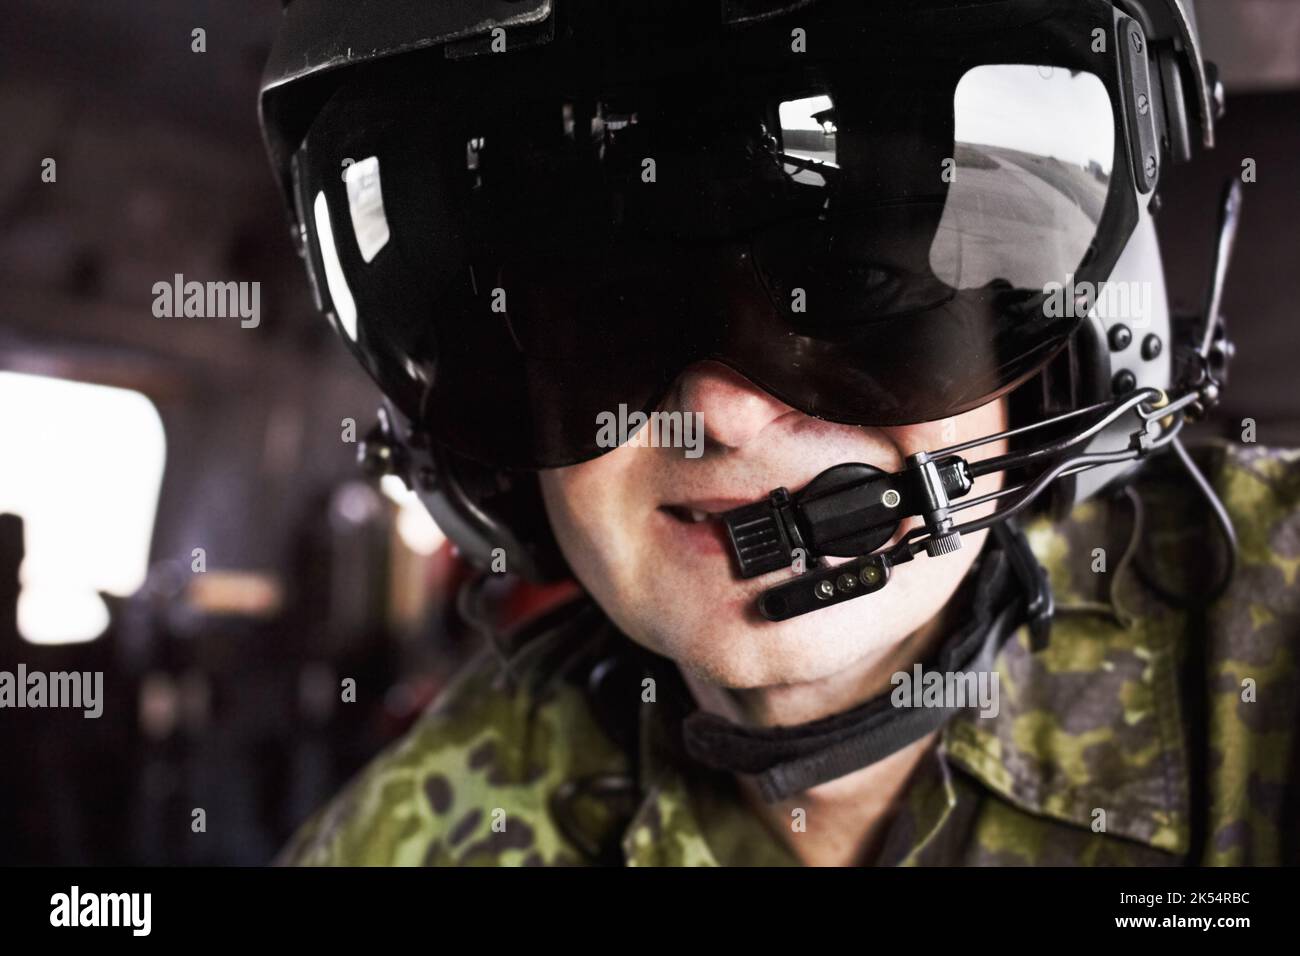 Smiling in the sky. A helicopter pilot wearing a helmet and smiling at the camera. Stock Photo